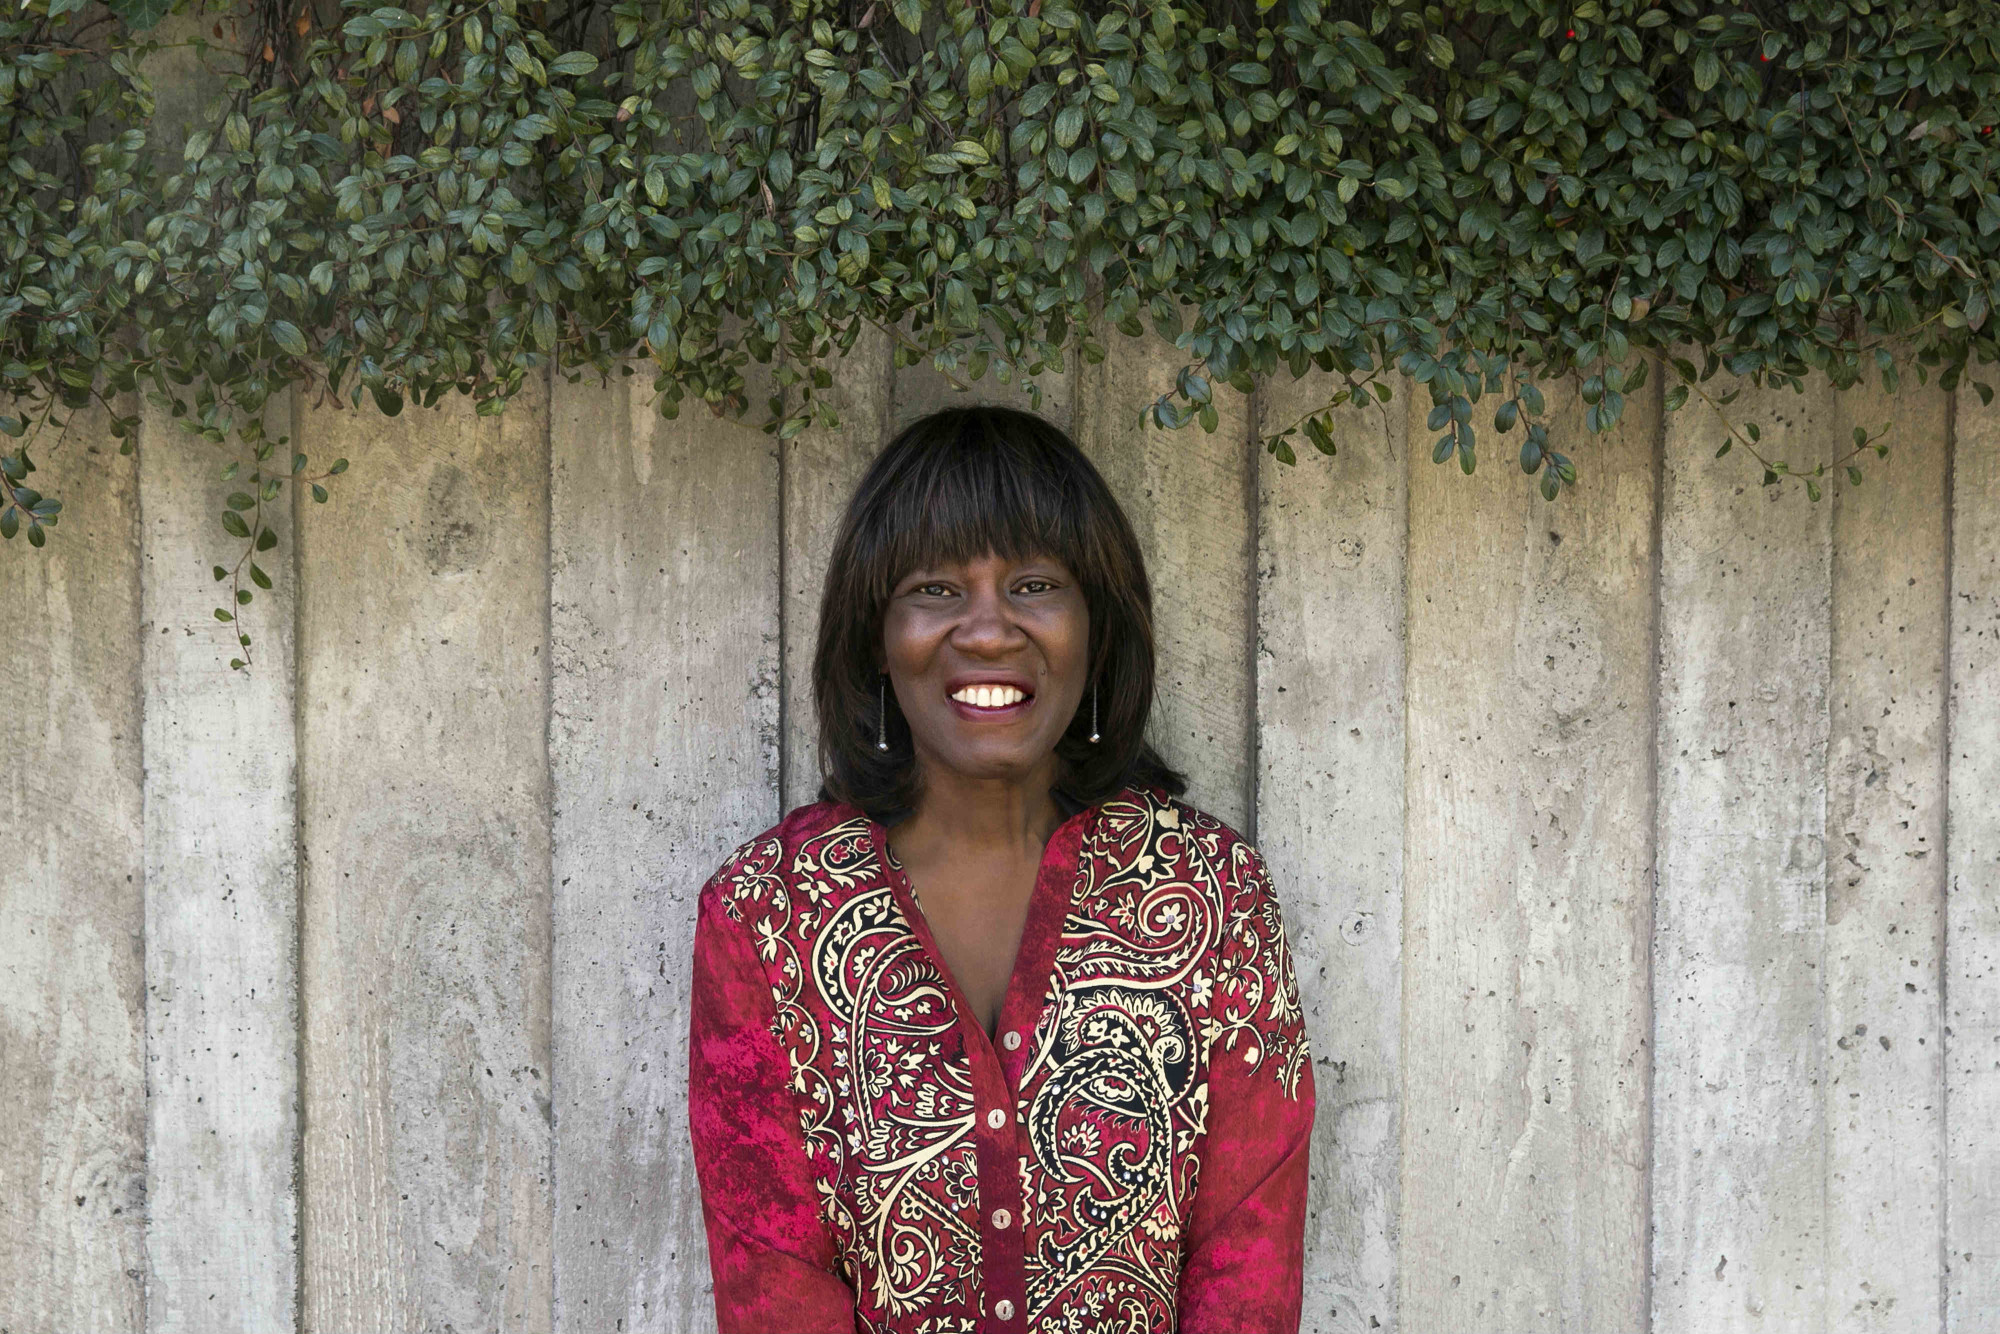 Patricia Smith photo by Beowulf Sheehan 1